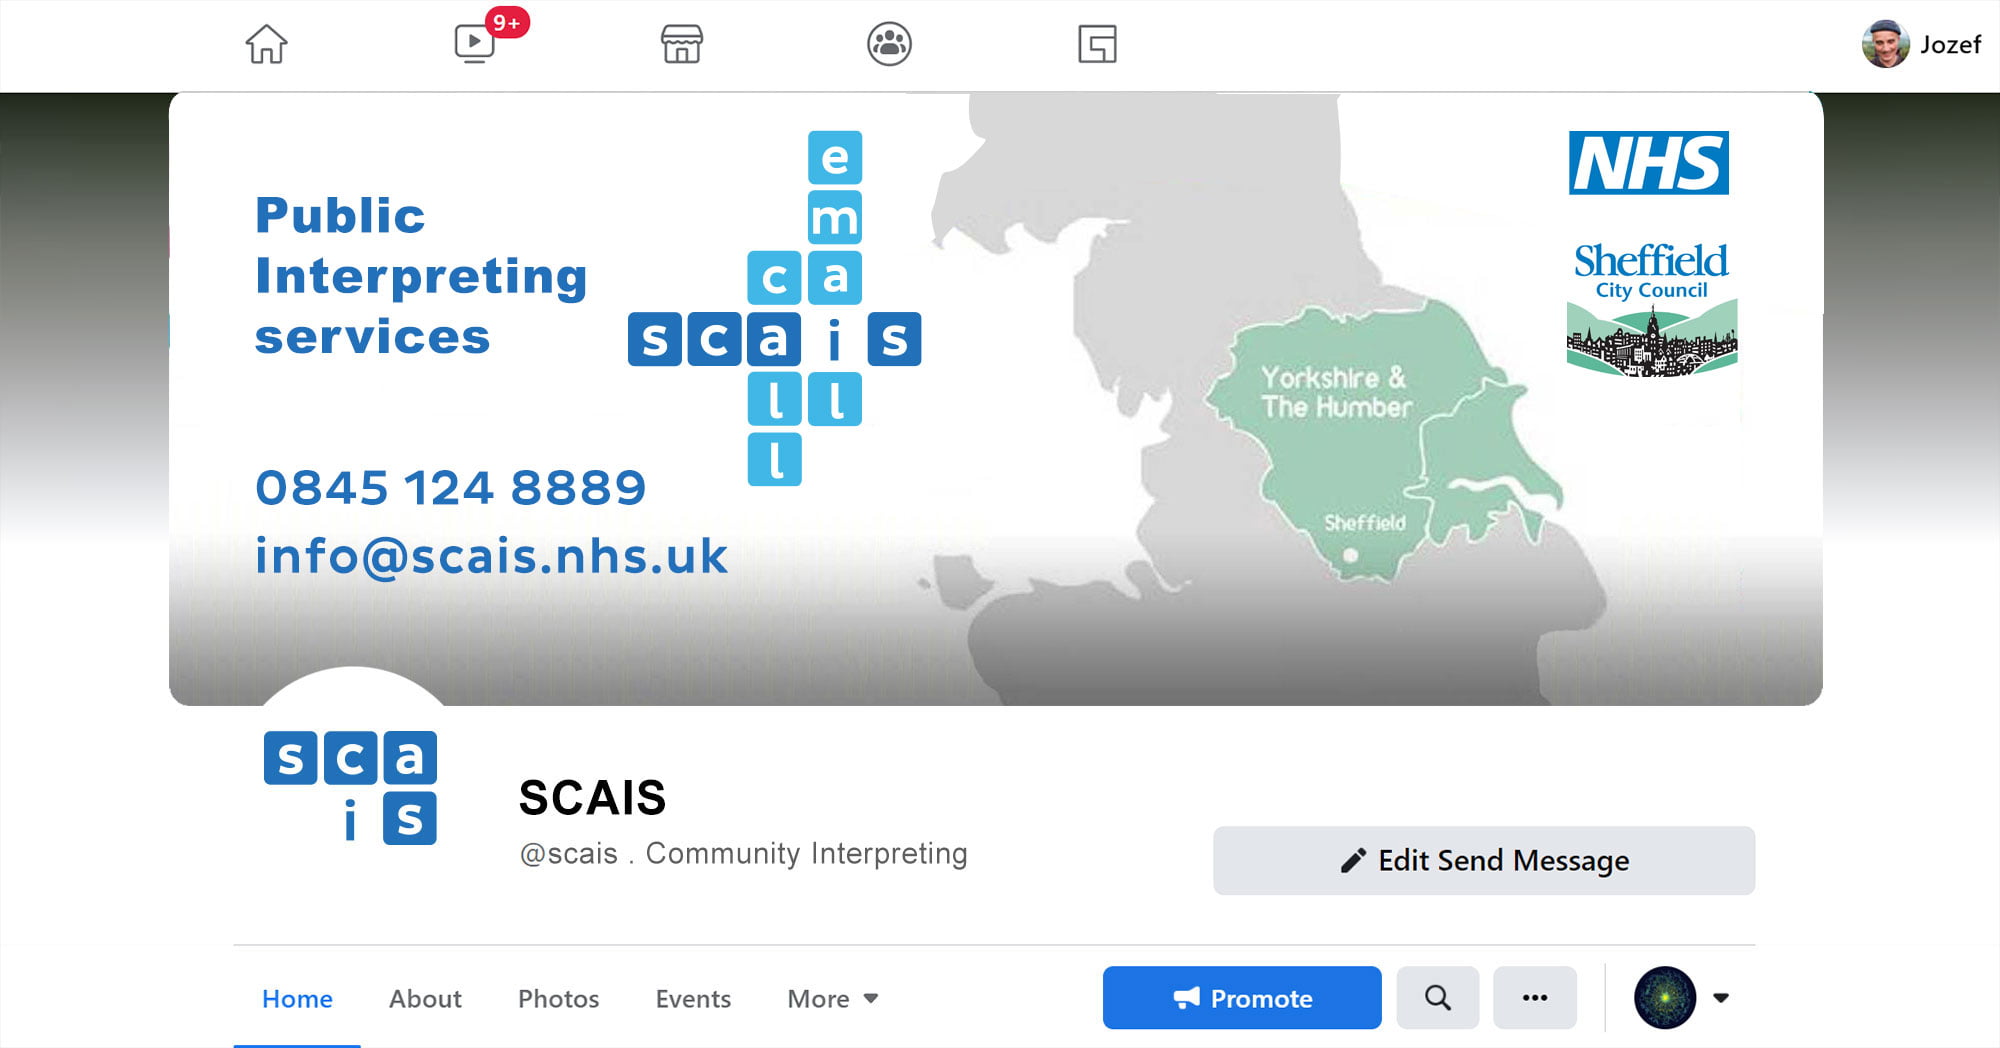 scais-facebook-banner-with-contact-details-map-of-england-and-map-of--Yorkshire-county-within-